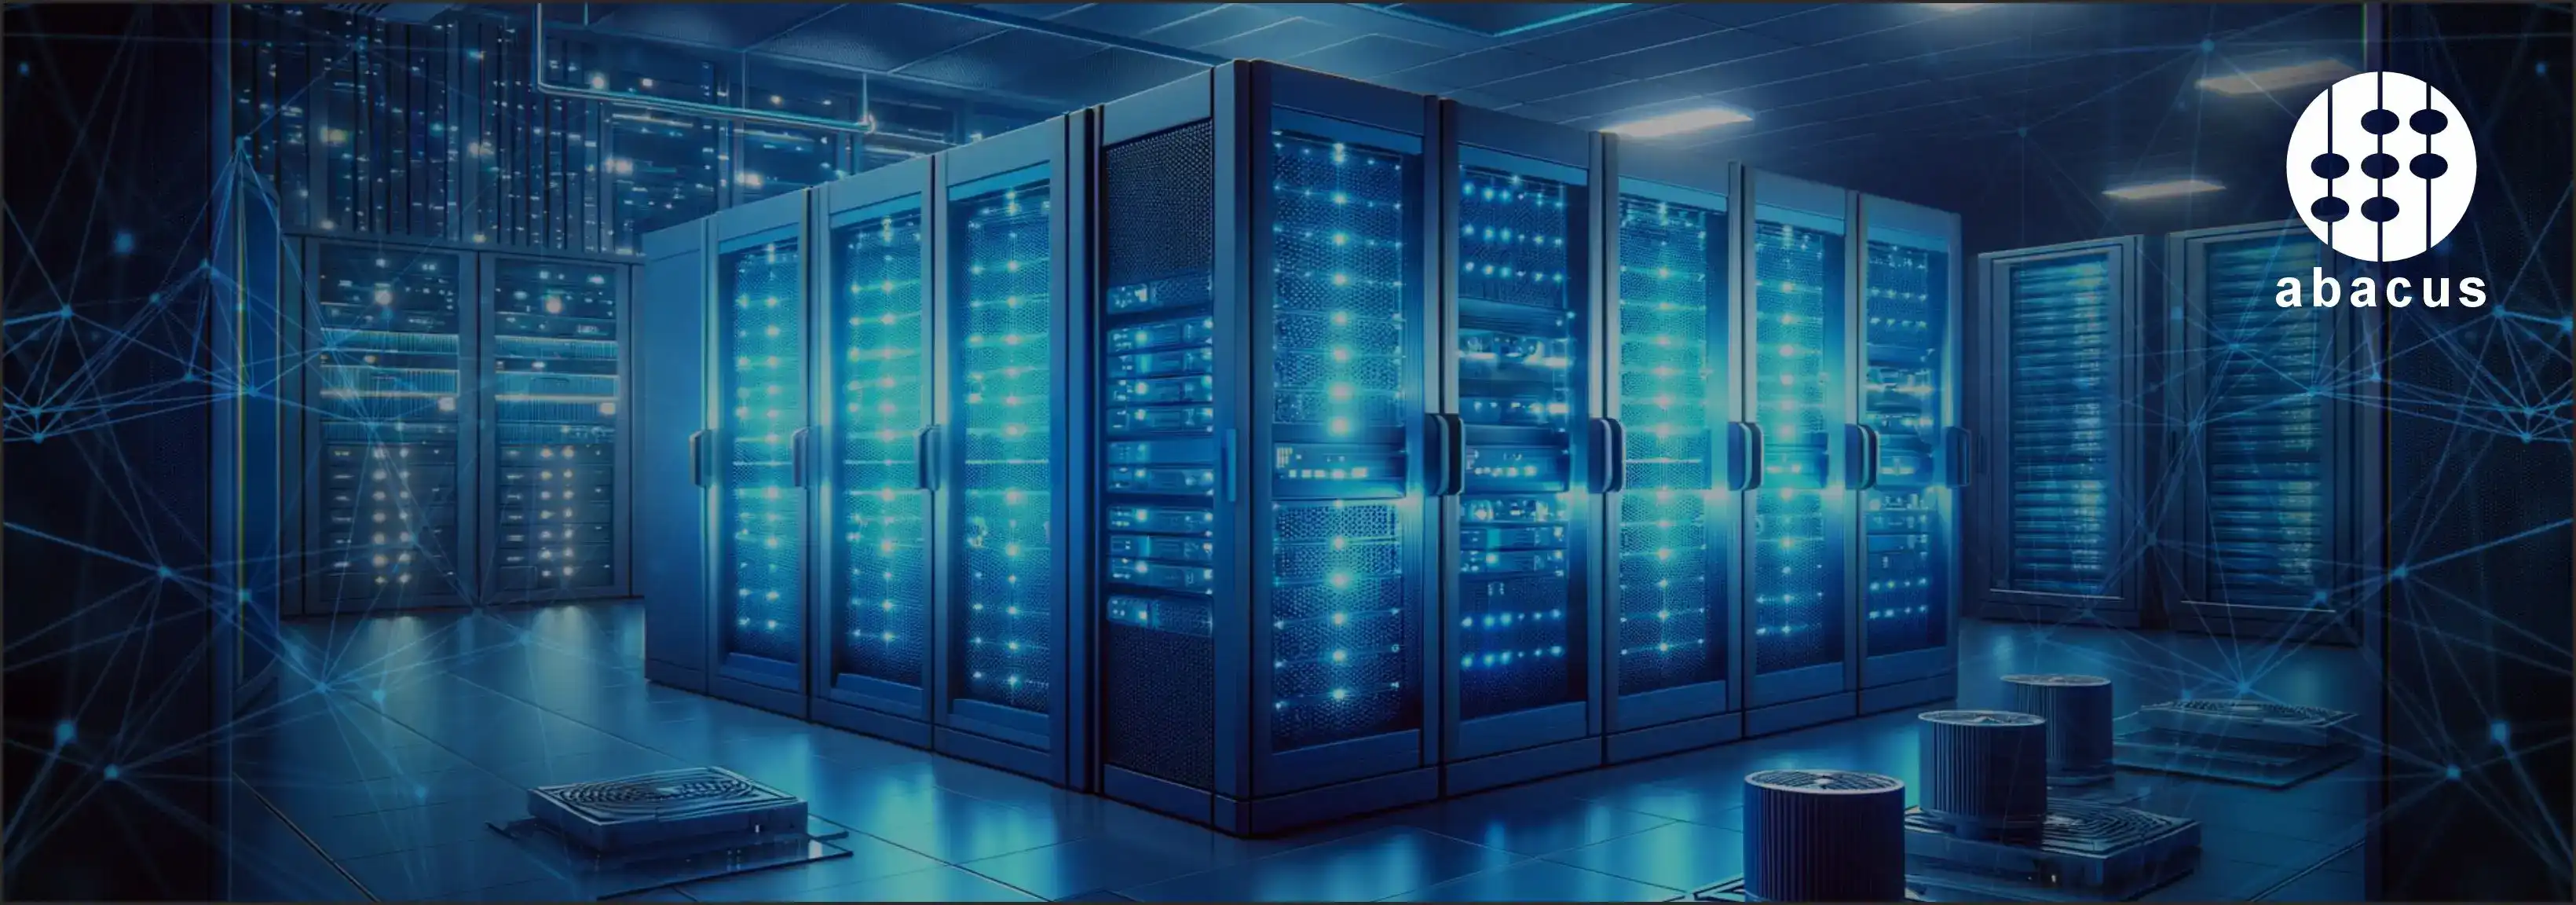 Abacus Data Center